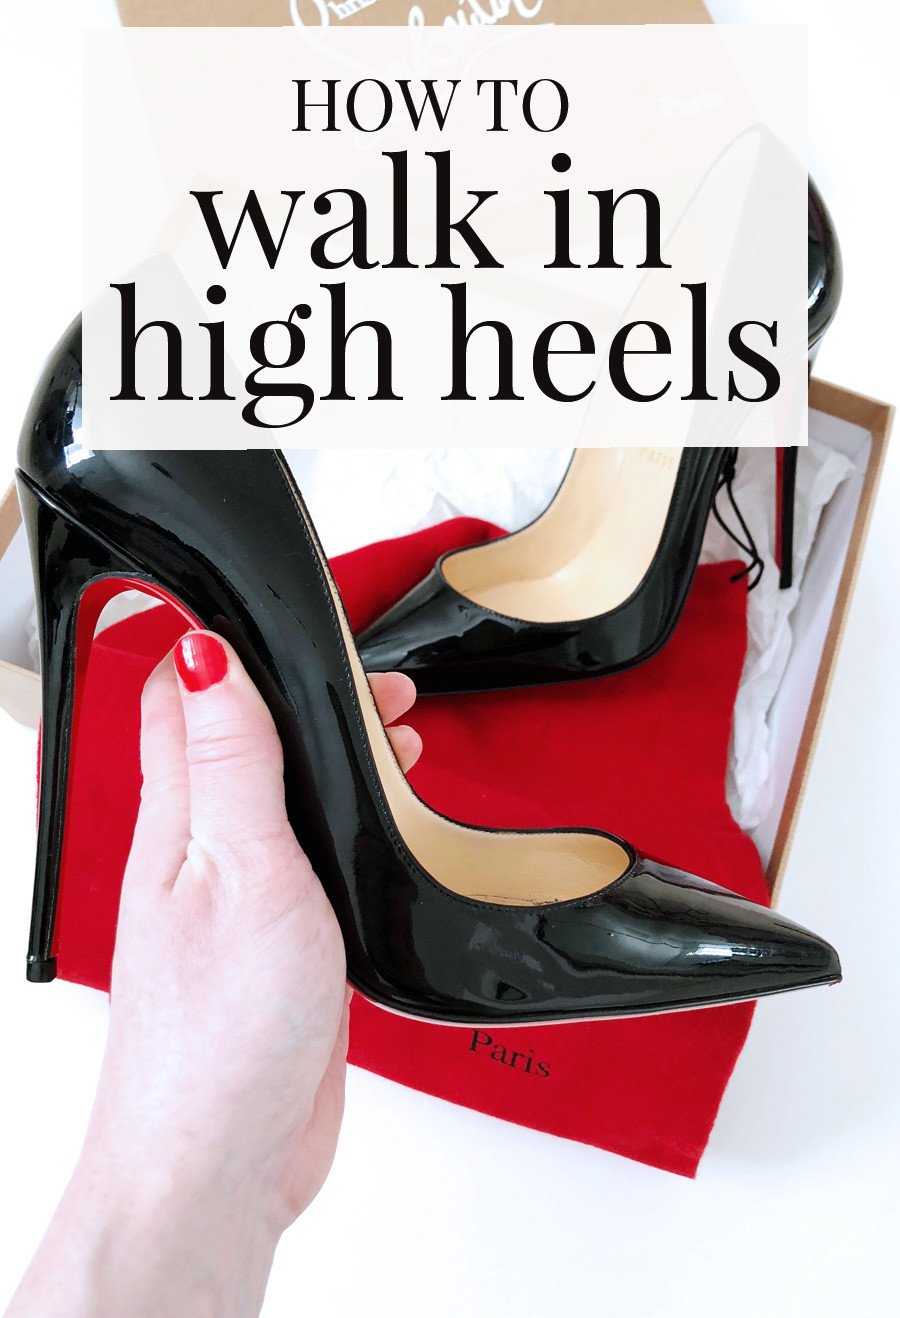 how to walk in high heels - the ultimate list of tips and advice